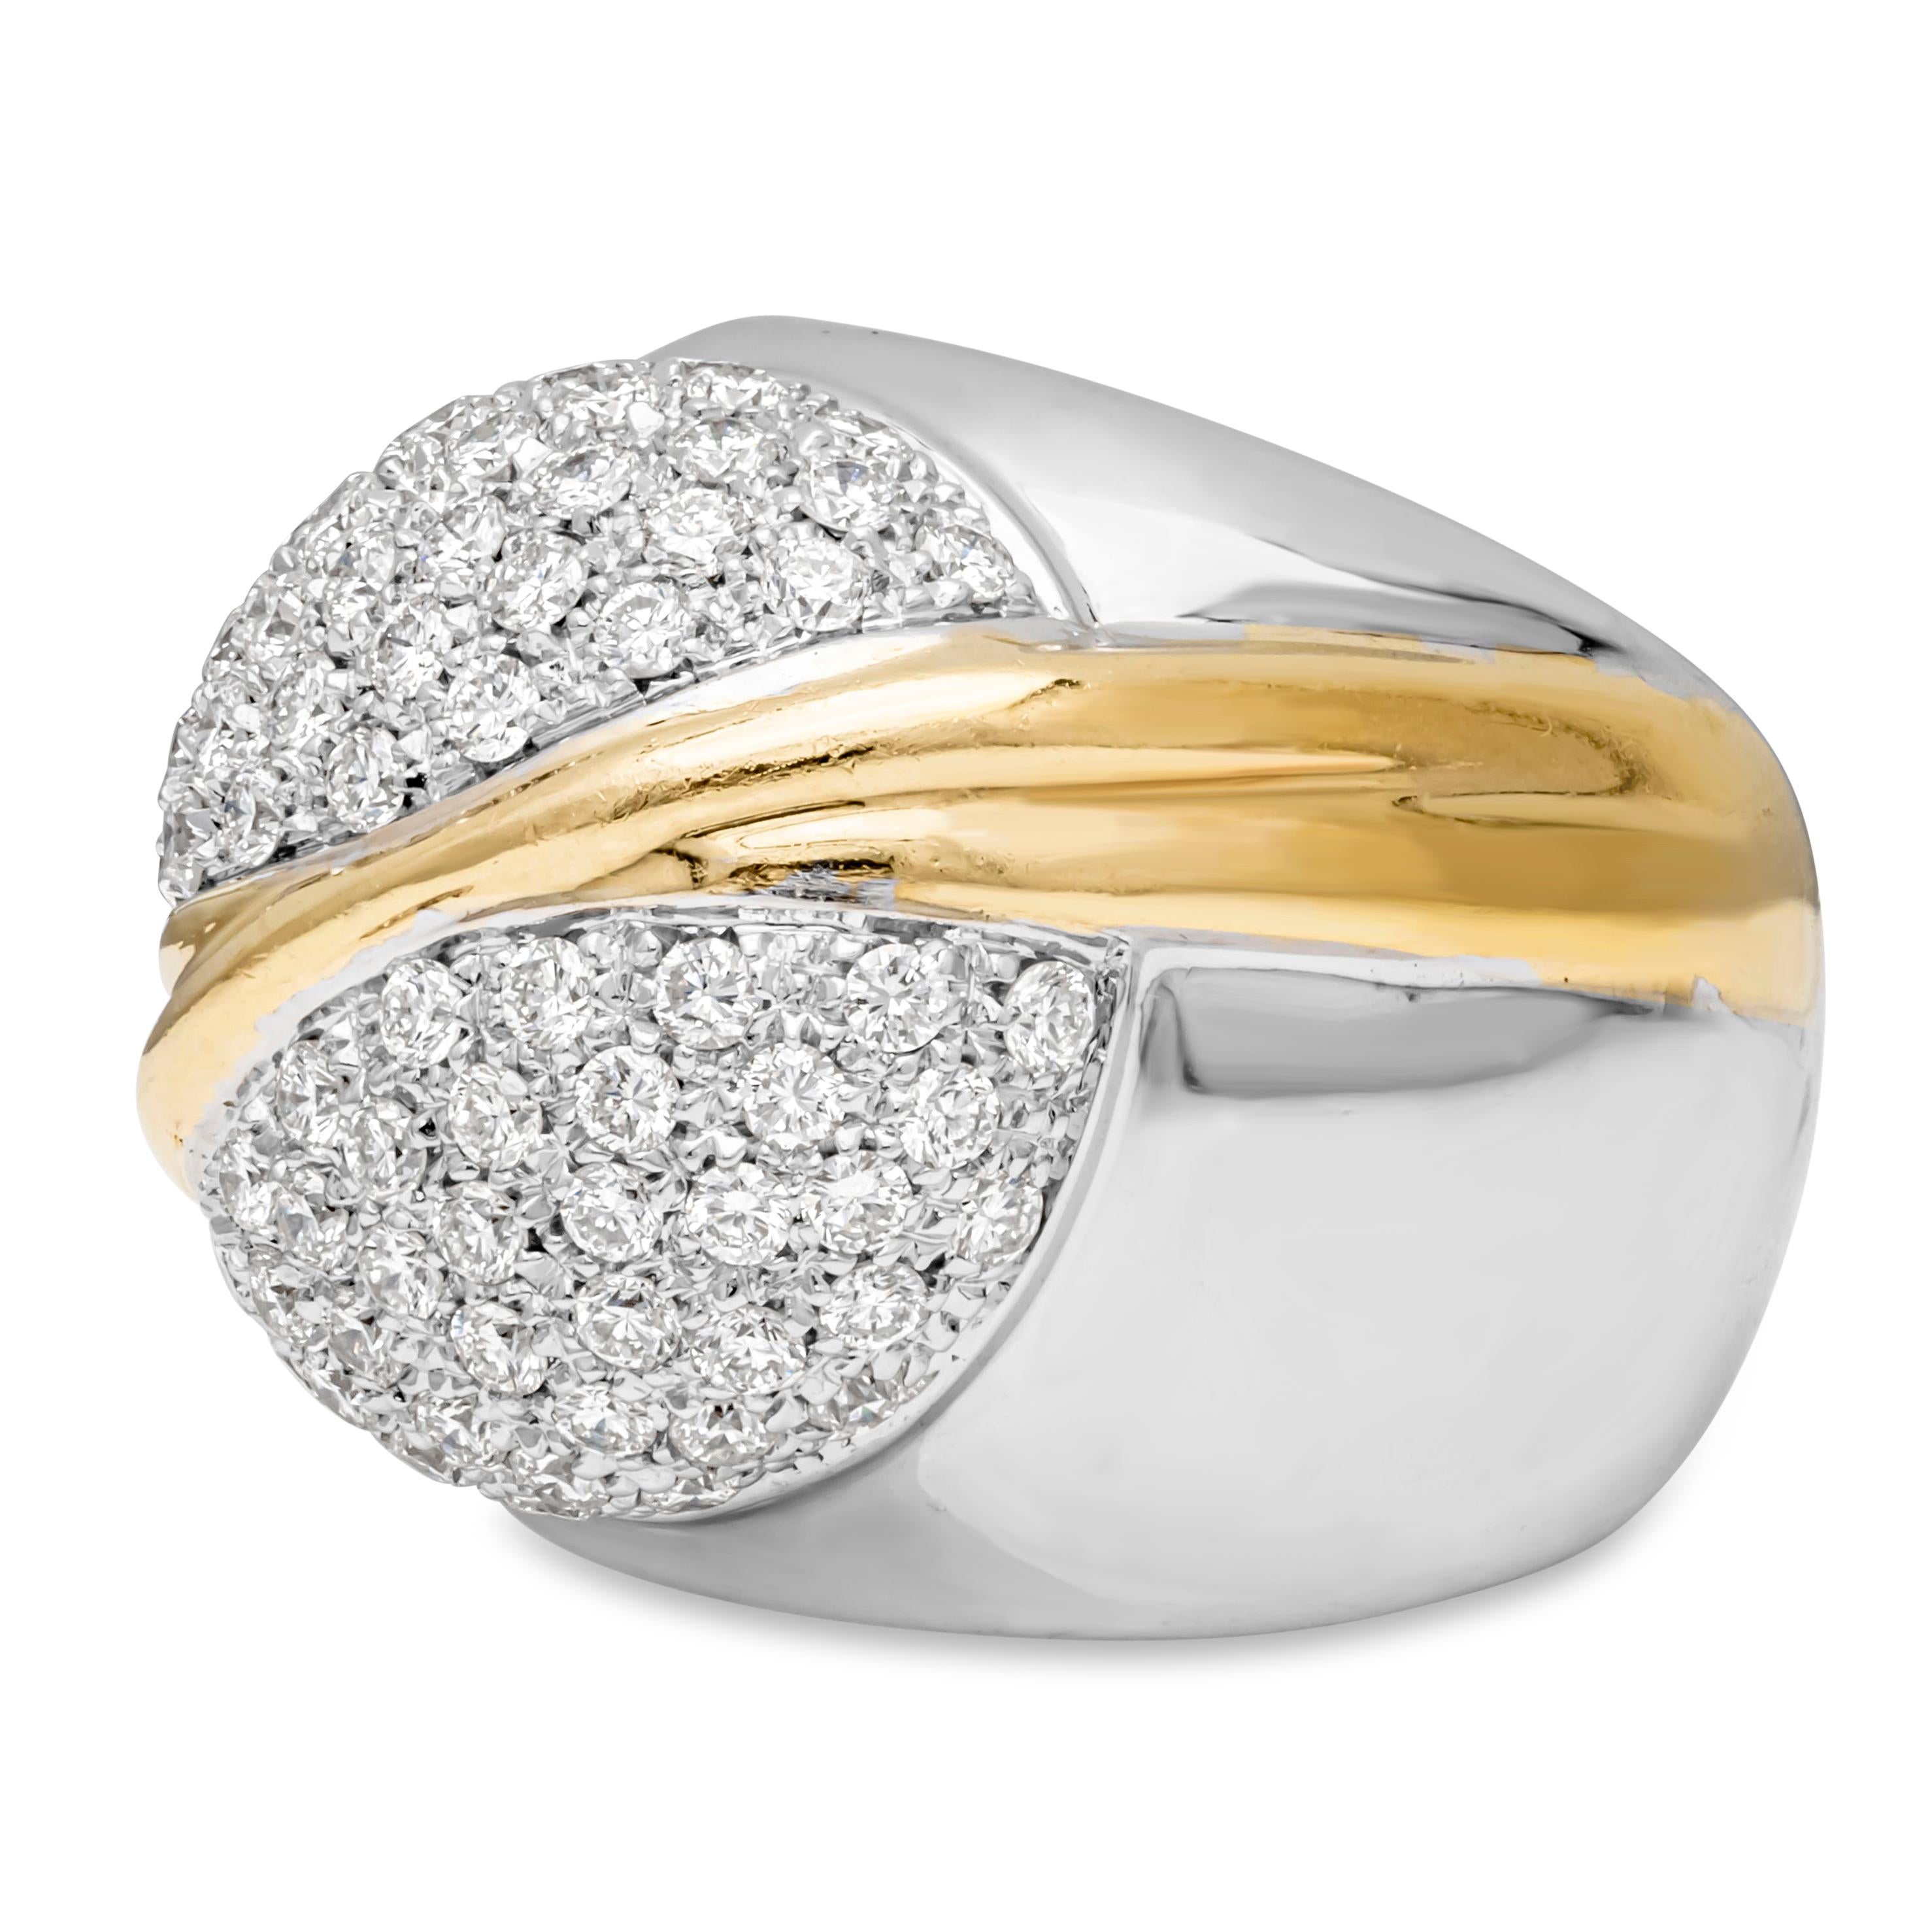 An exquisite and artistic wide fashion ring, showcasing 78 round brilliant cut diamonds weighing 3.06 carats total with G color and VS-SI clarity, set on a timeless micropavé dome design. Perfectly made with 18K white gold and yellow gold, 20.7 mm